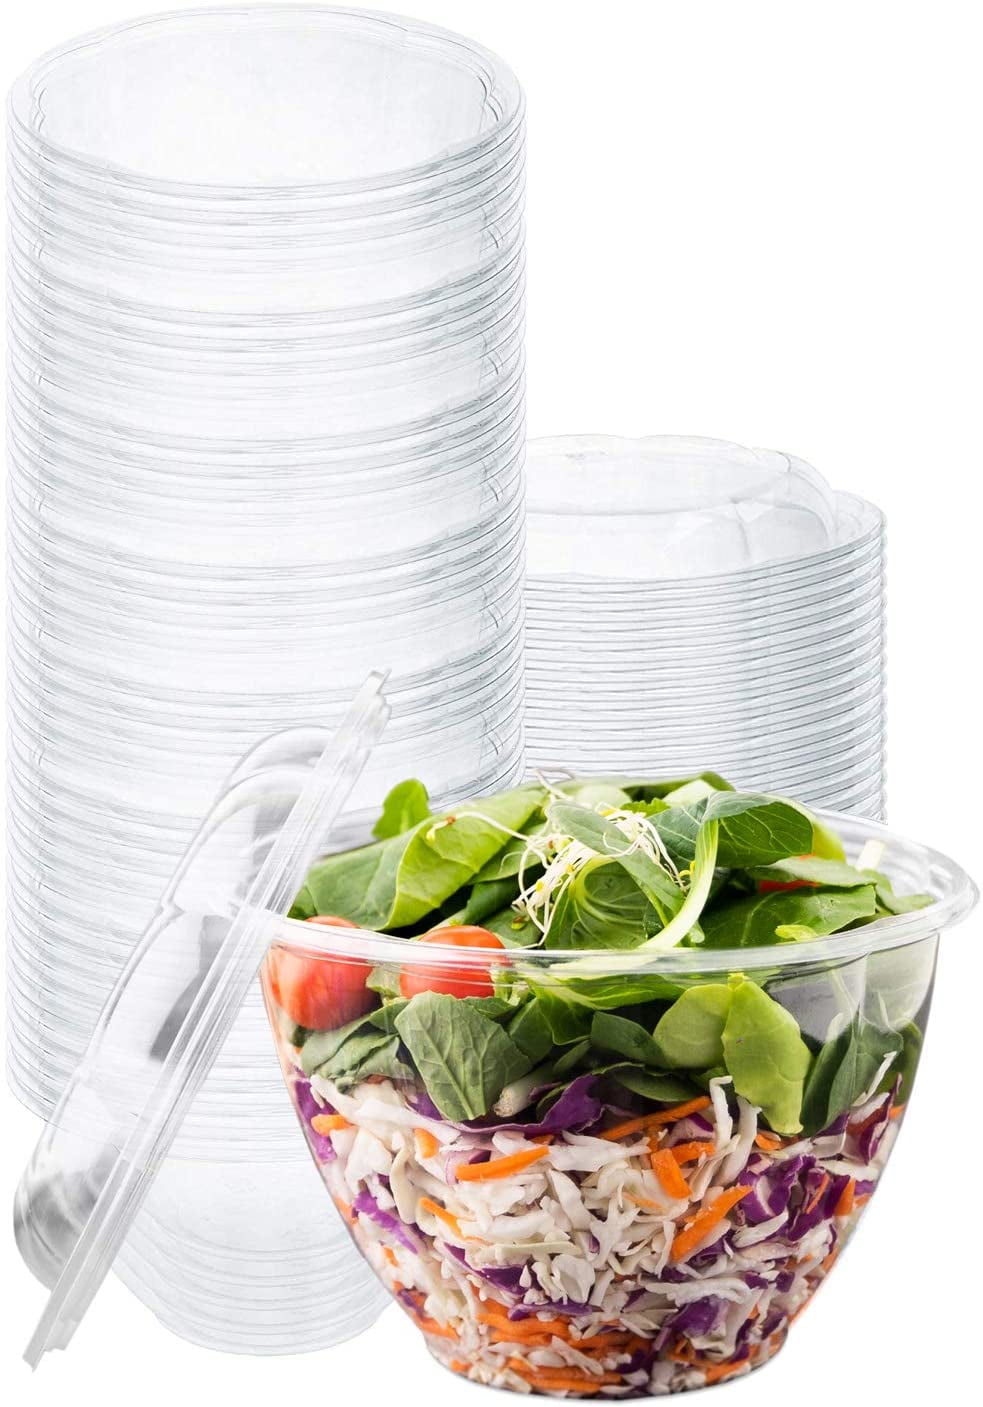 15 48 oz Clear Plastic Salad Bowls with Airtight Lids BPA Free Food Containers 